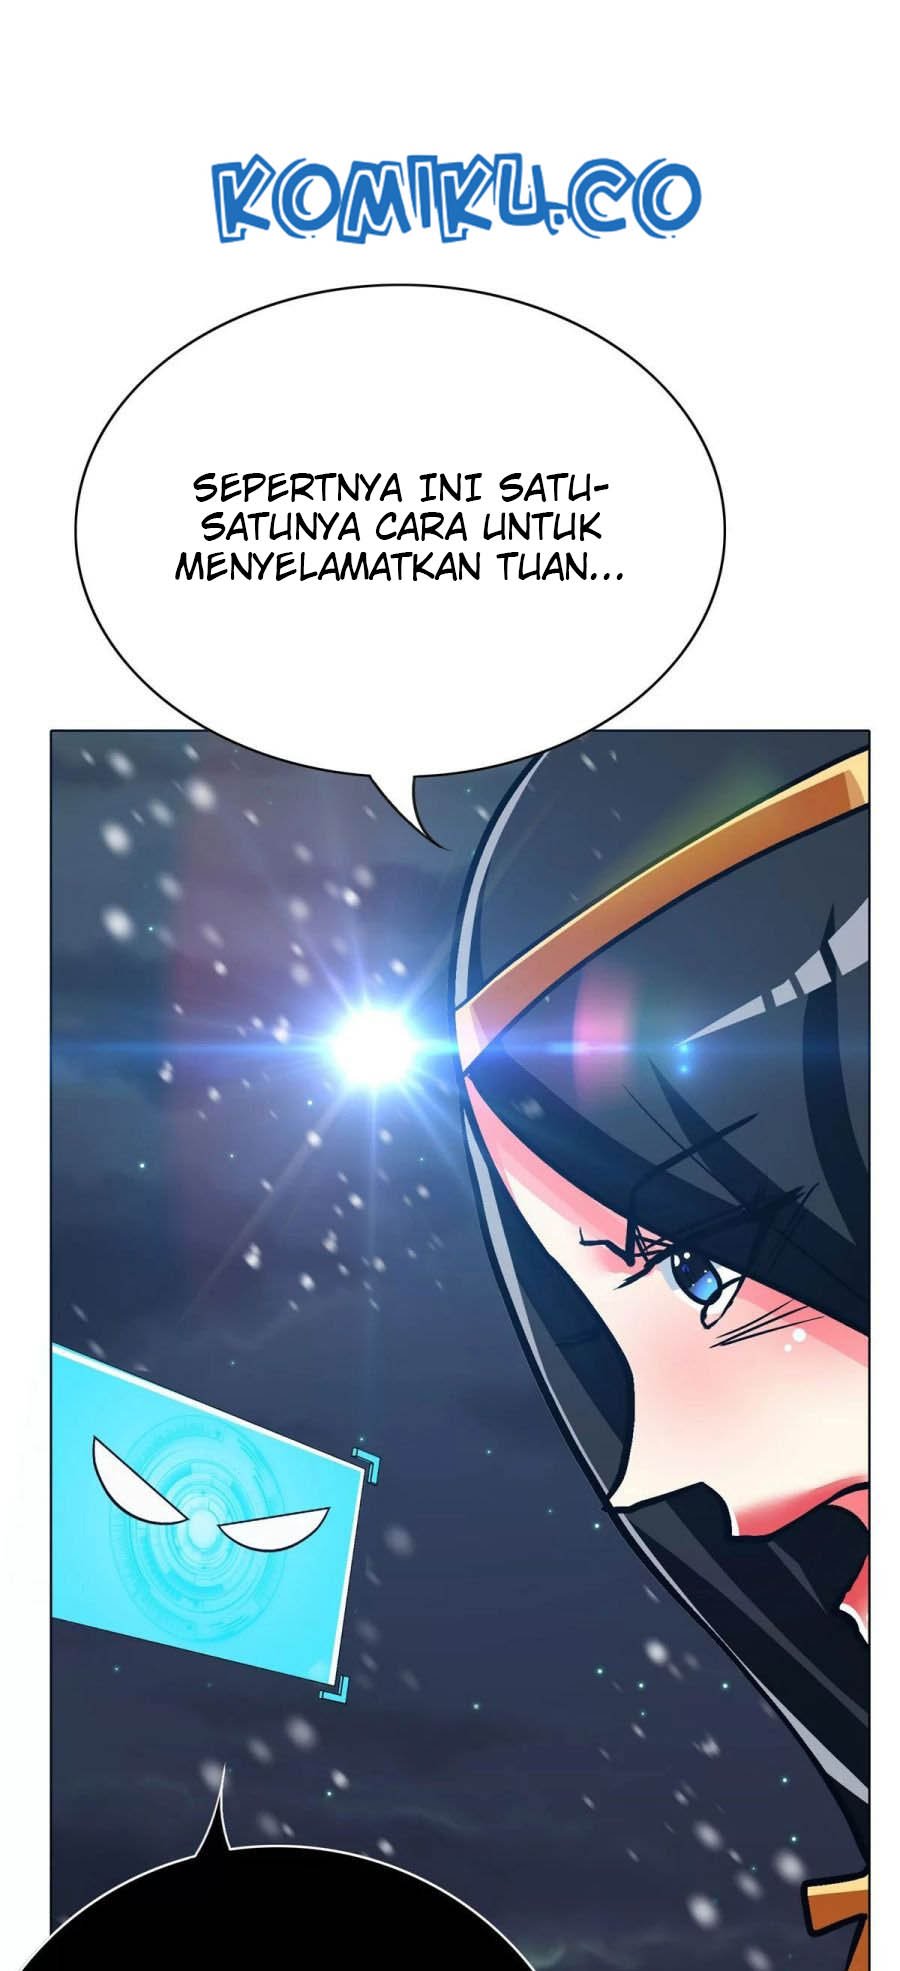 Xianzun System in the City Chapter 105